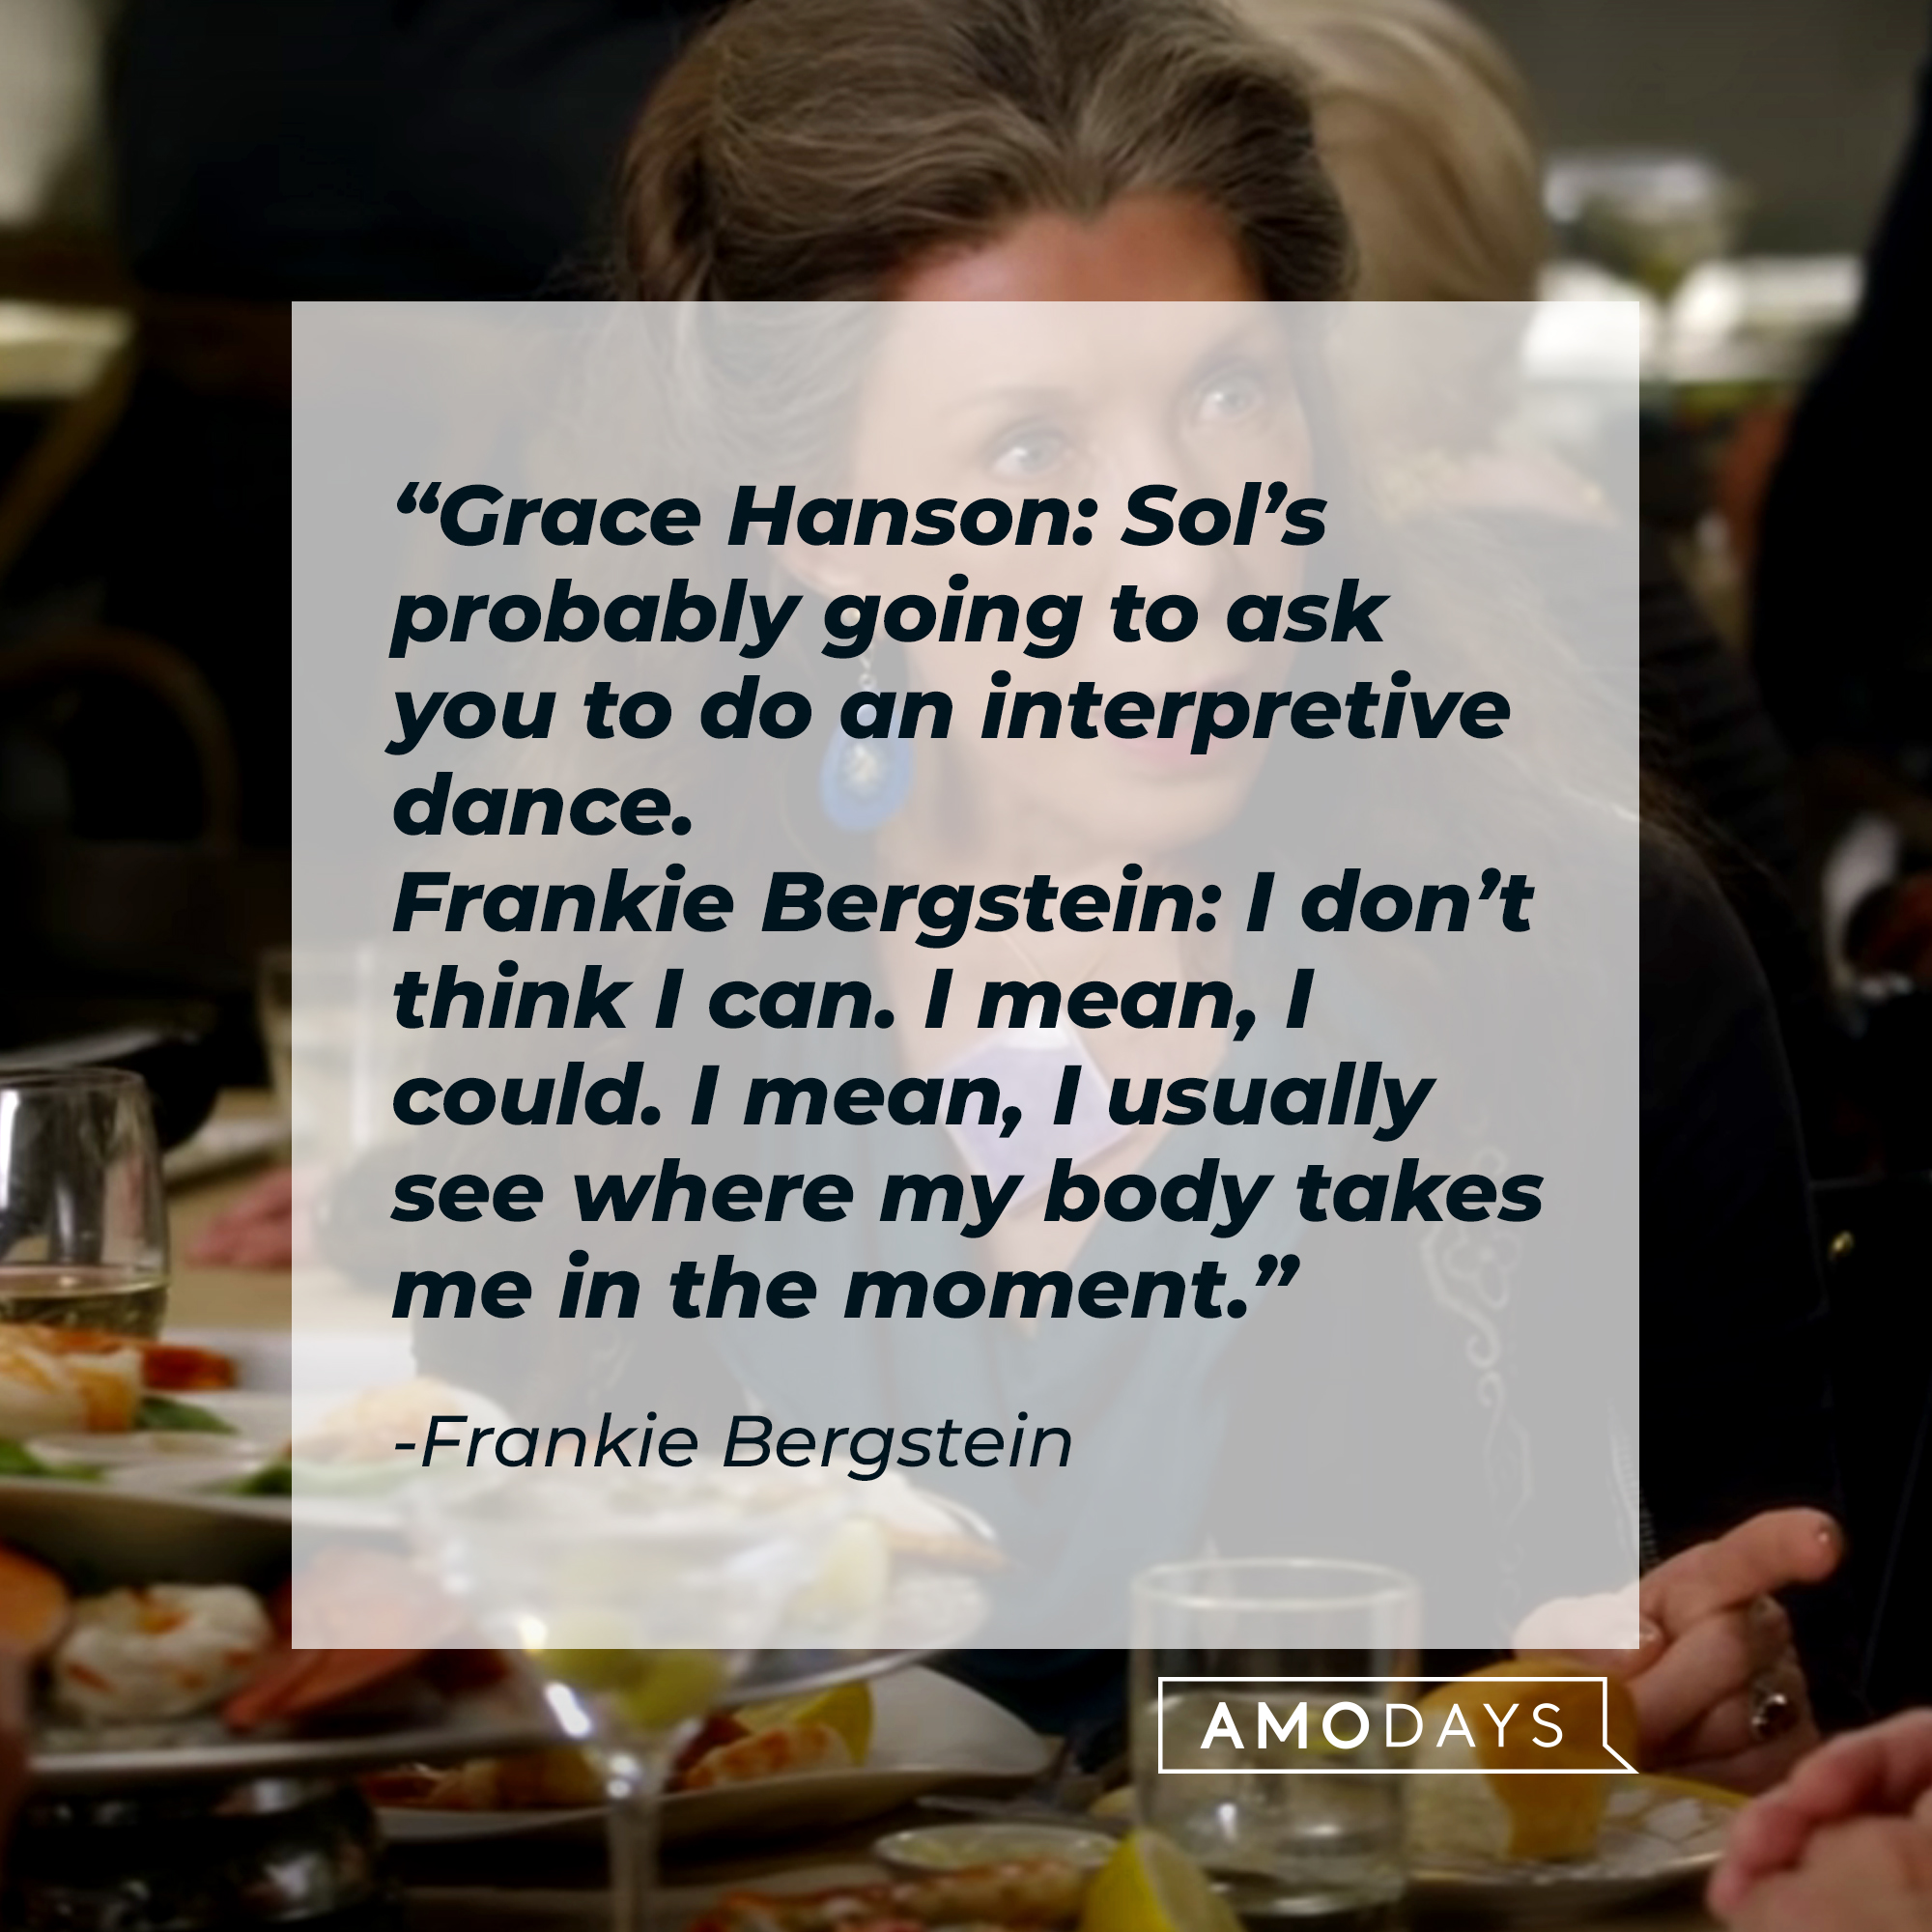 Frankie Bergstein's quote: "Grace Hanson: Sol’s probably going to ask you to do an interpretive dance. Frankie Bergstein: I don’t think I can. I mean, I could. I mean, I usually see where my body takes me in the moment.” | Source: youtube.com/Netflix